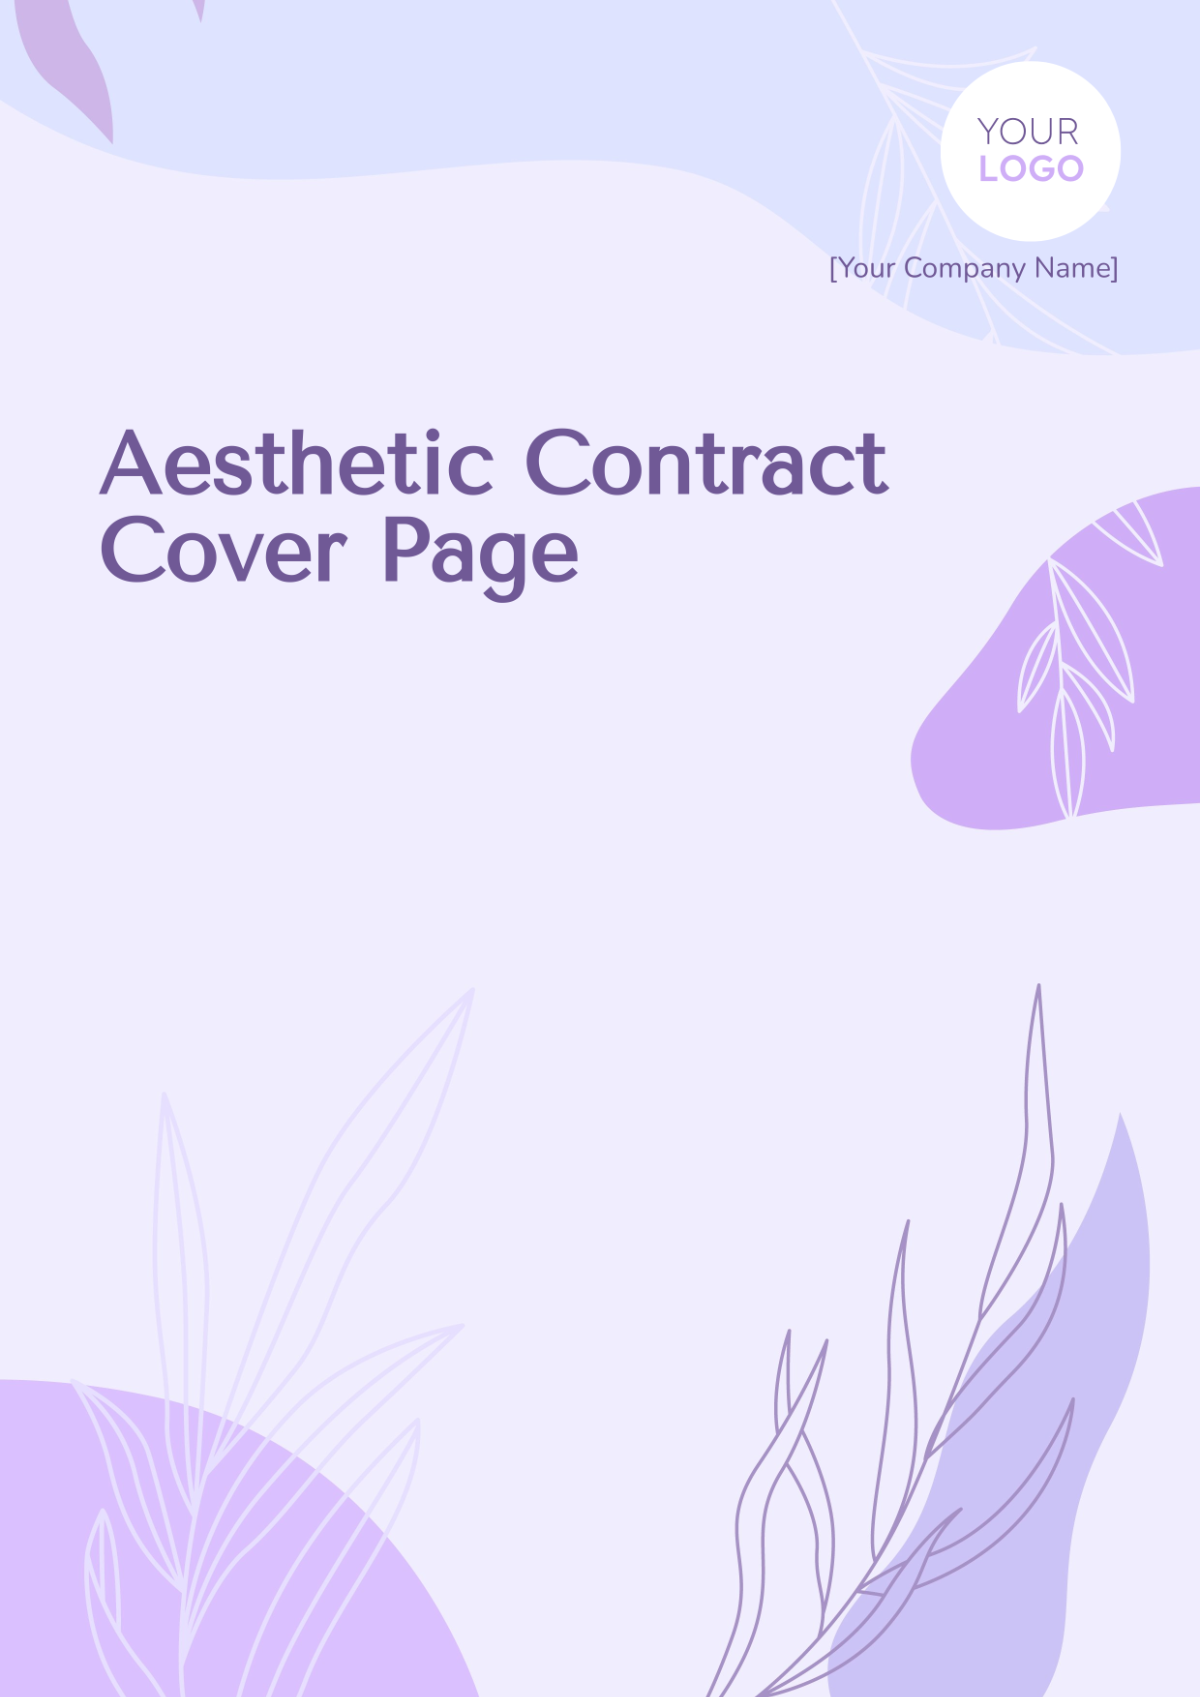 Aesthetic Contract Cover Page Template